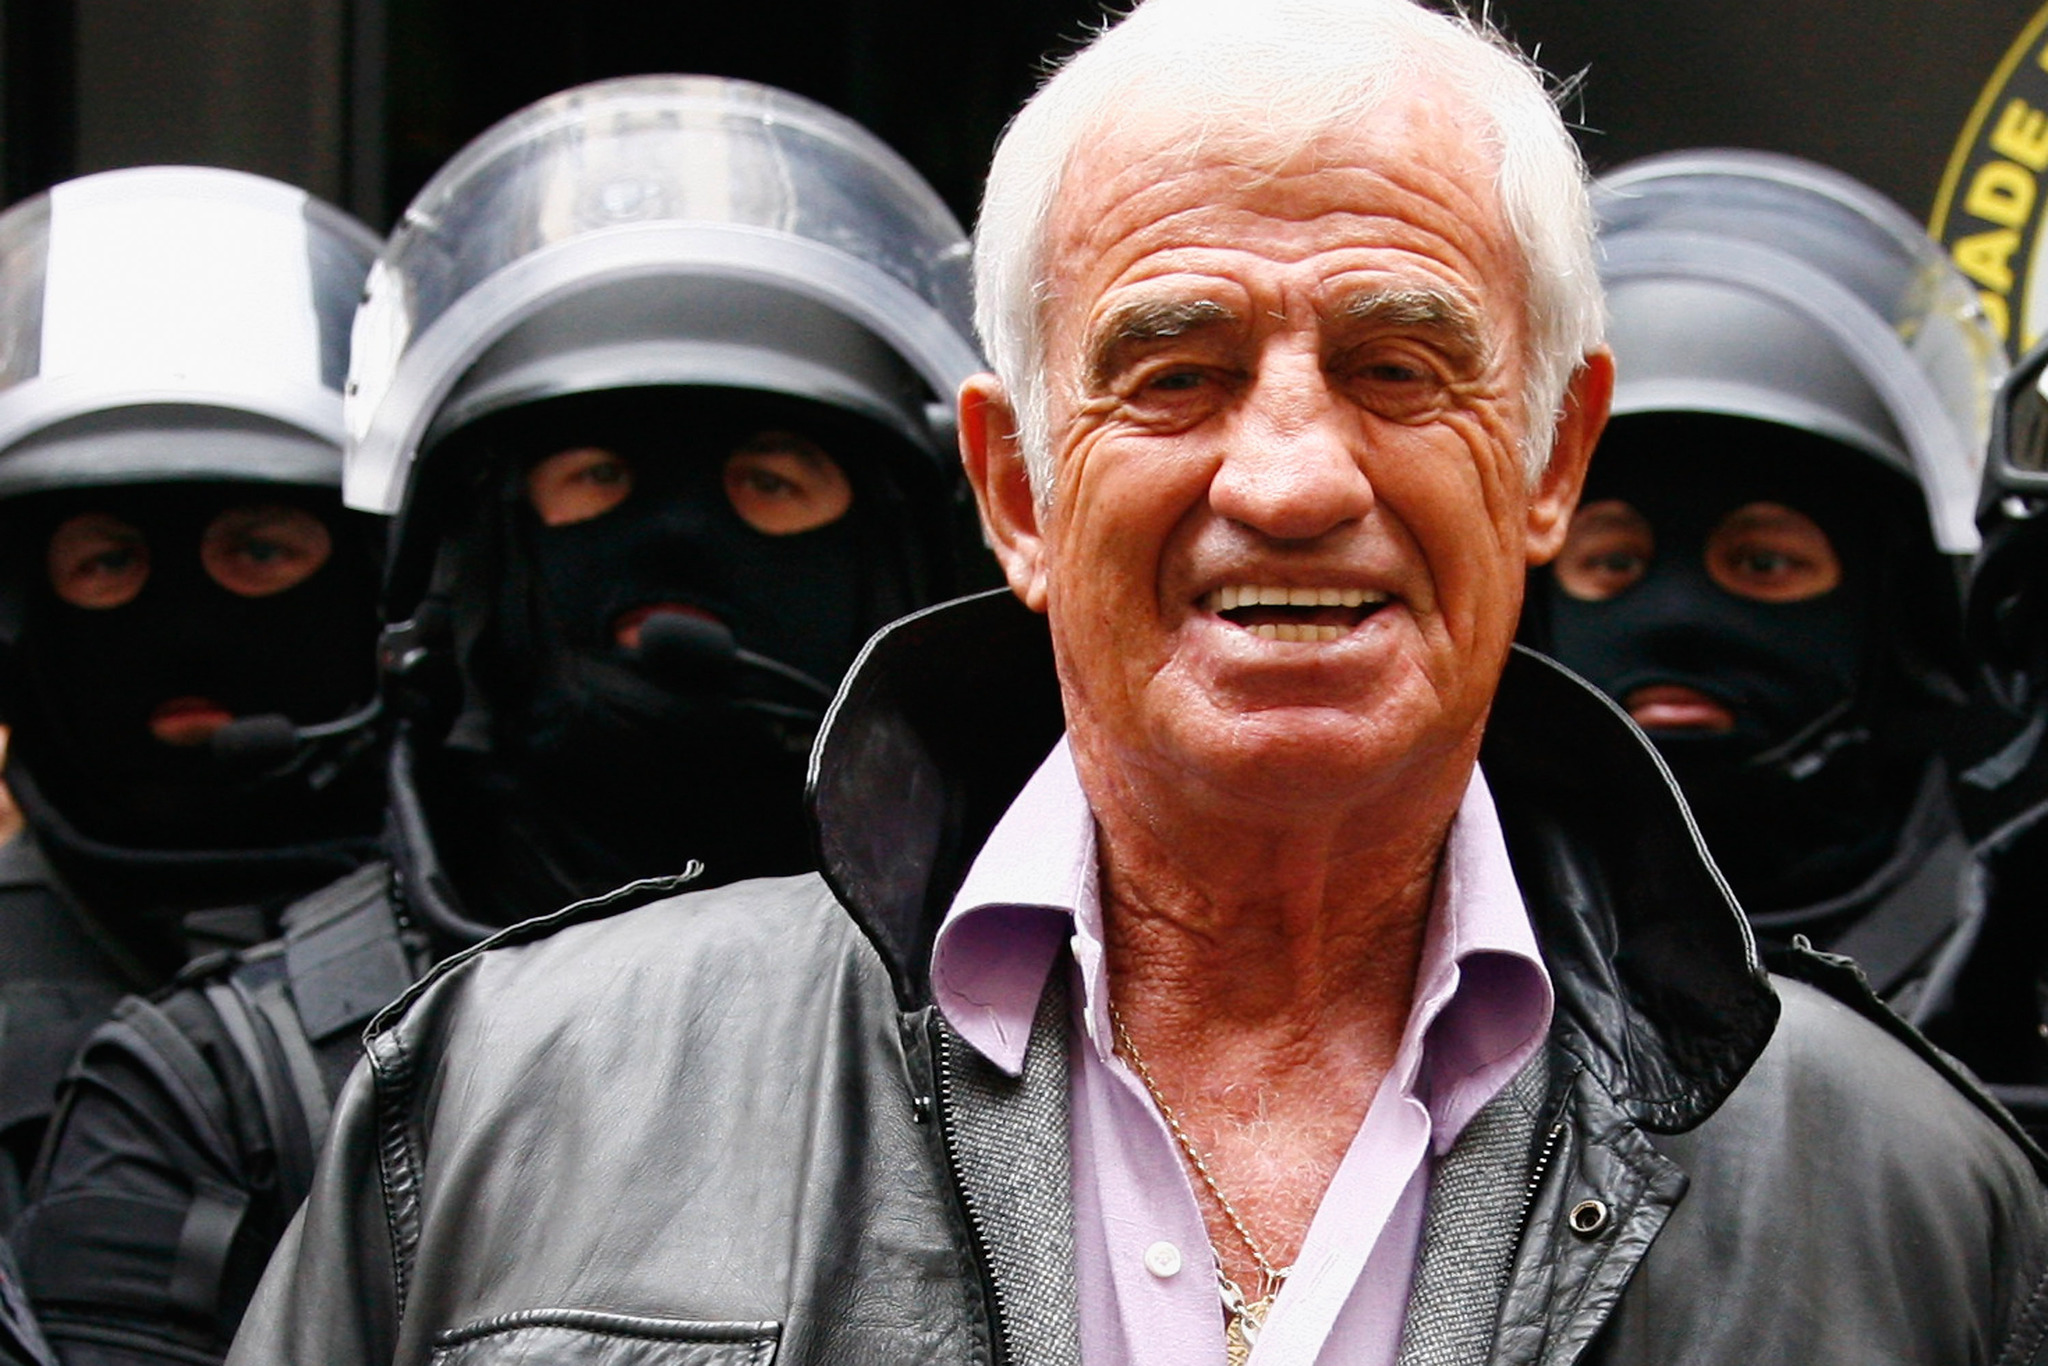 French actor Jean-Paul Belmondo, 75, guest of honor of the Parisian judiciary police, arrives for the 'Quai des Orfevres' literary award ceremony on November 12, 2008 in Paris, France. After a career playing a range of police roles Belmondo posed for photos with the Parisian Judiciary Police.